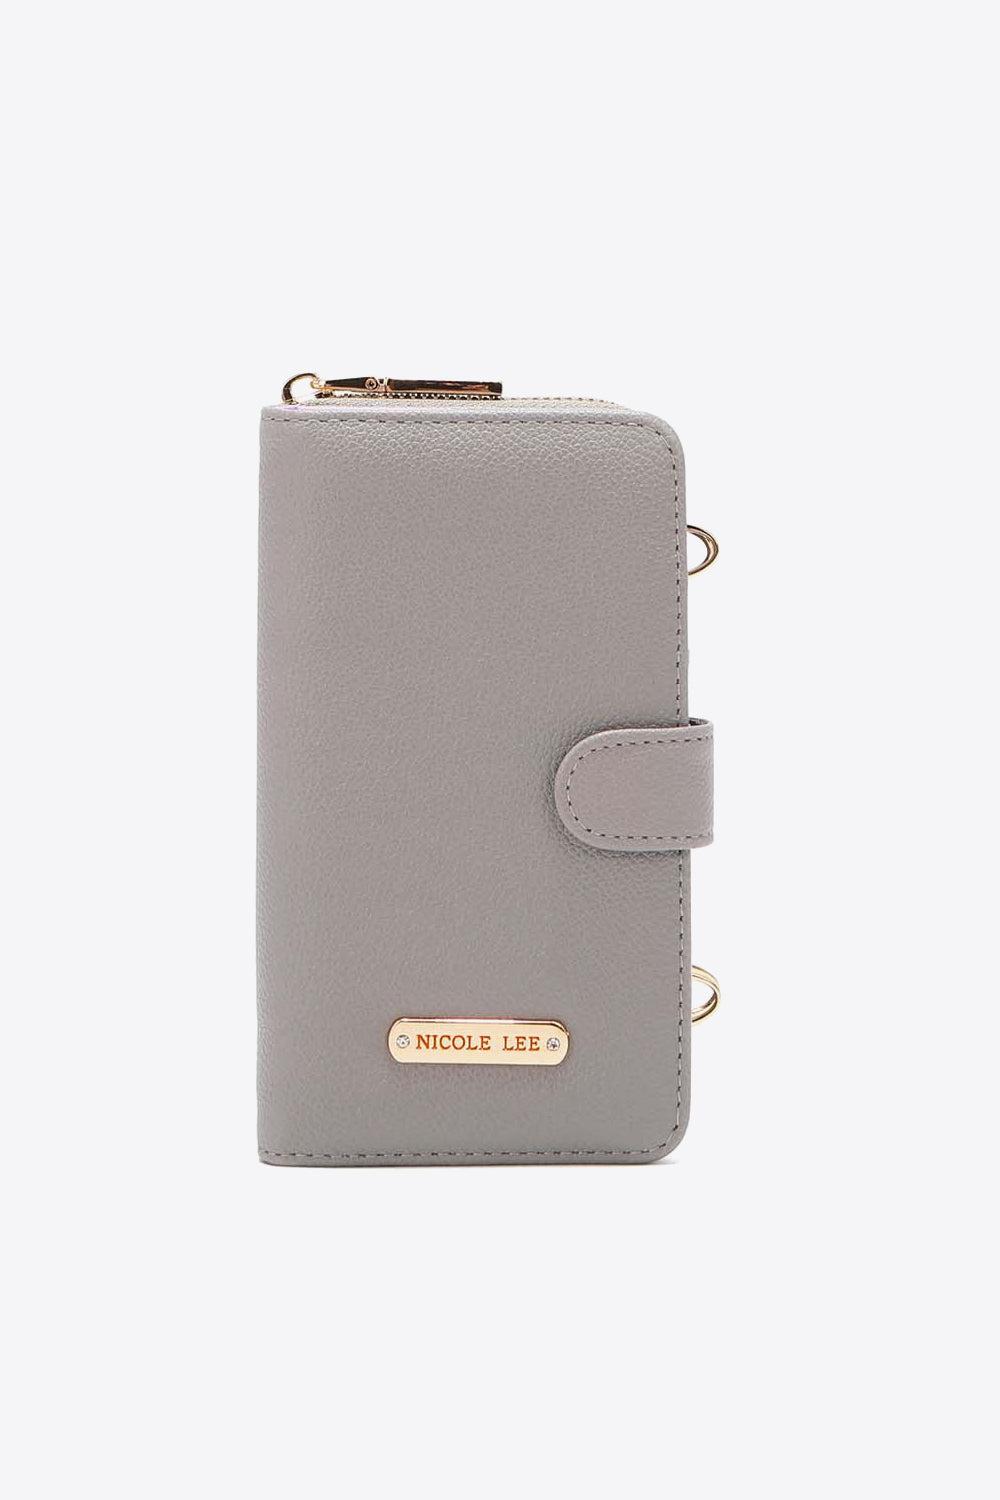 Nicole Lee USA Two-Piece Crossbody Phone Case Wallet BLUE ZONE PLANET